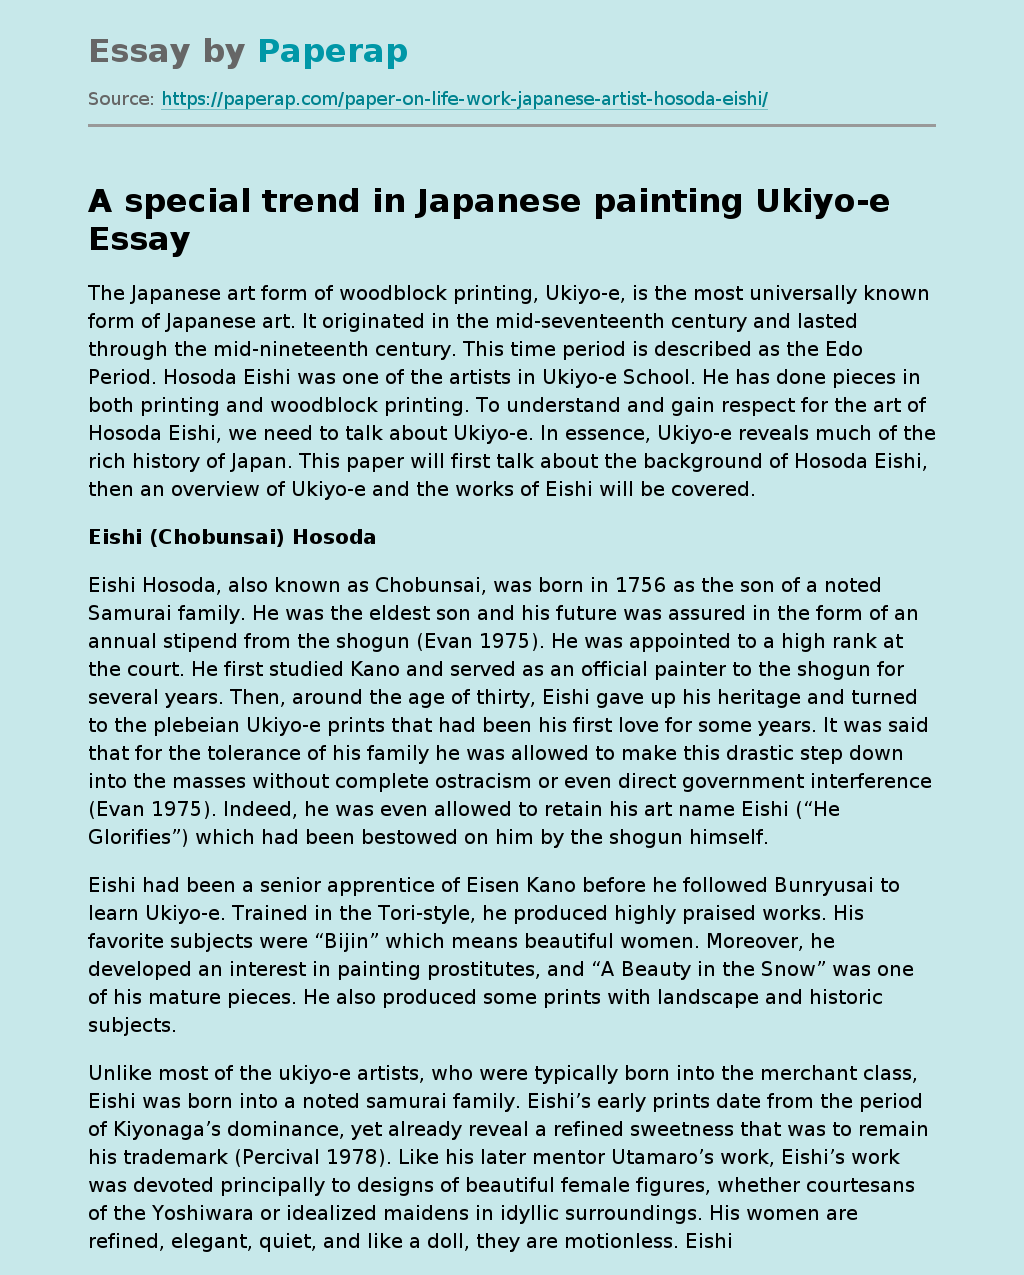 A special trend in Japanese painting Ukiyo-e